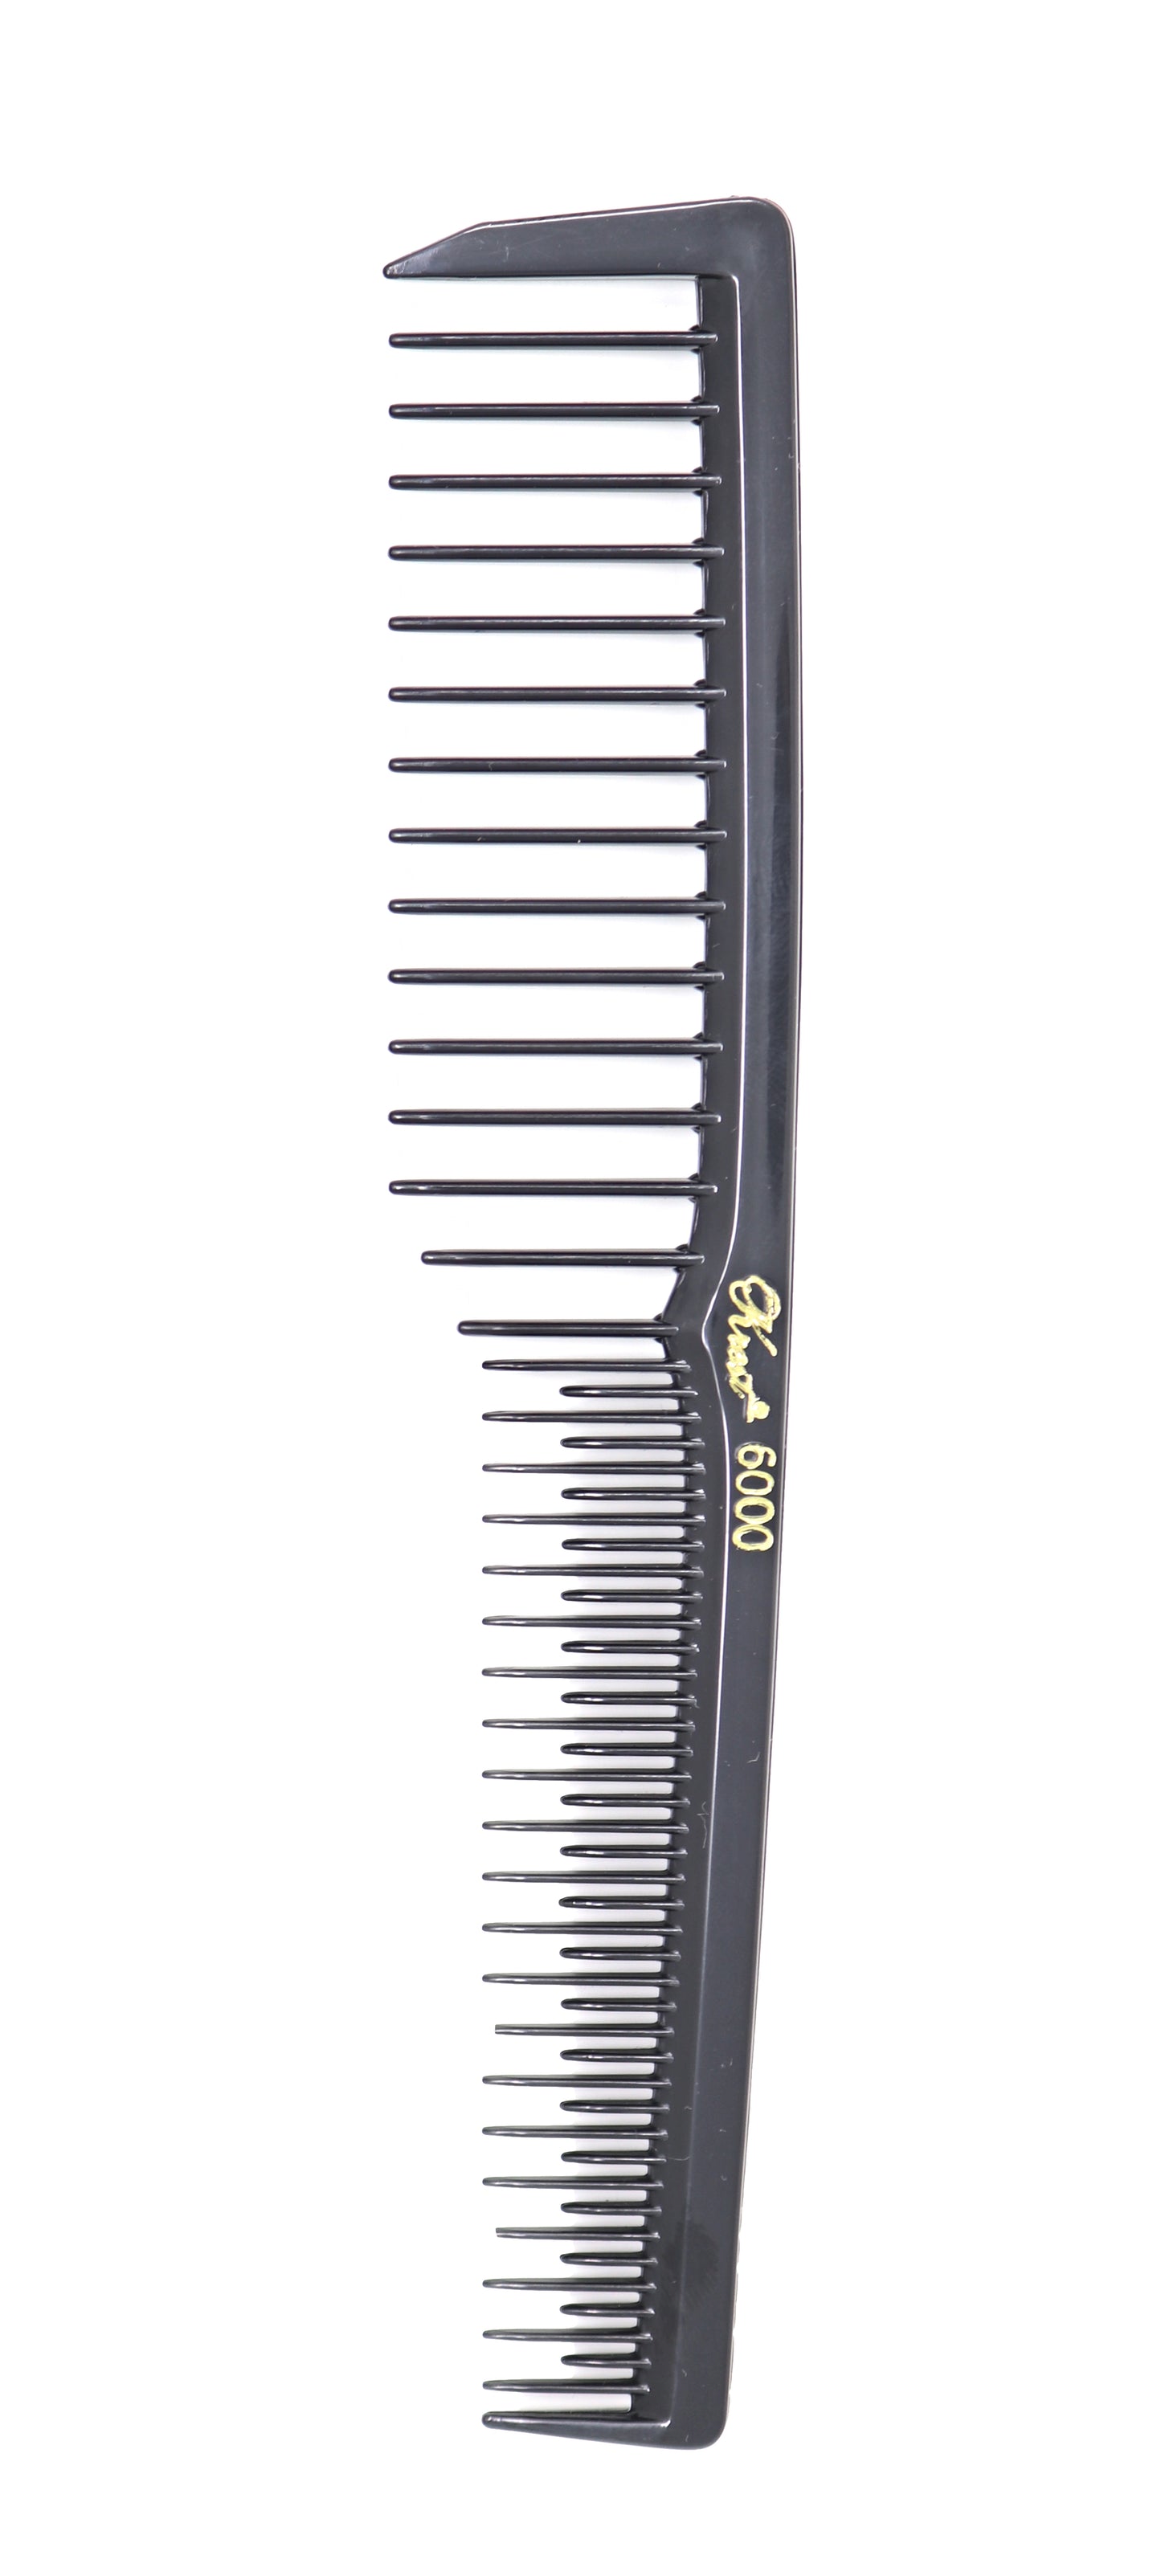 Krest 6000 Teasing Combs Lift Vent Hair Combs Pack Space Tooth Wide teeth Comb 3 Pc.